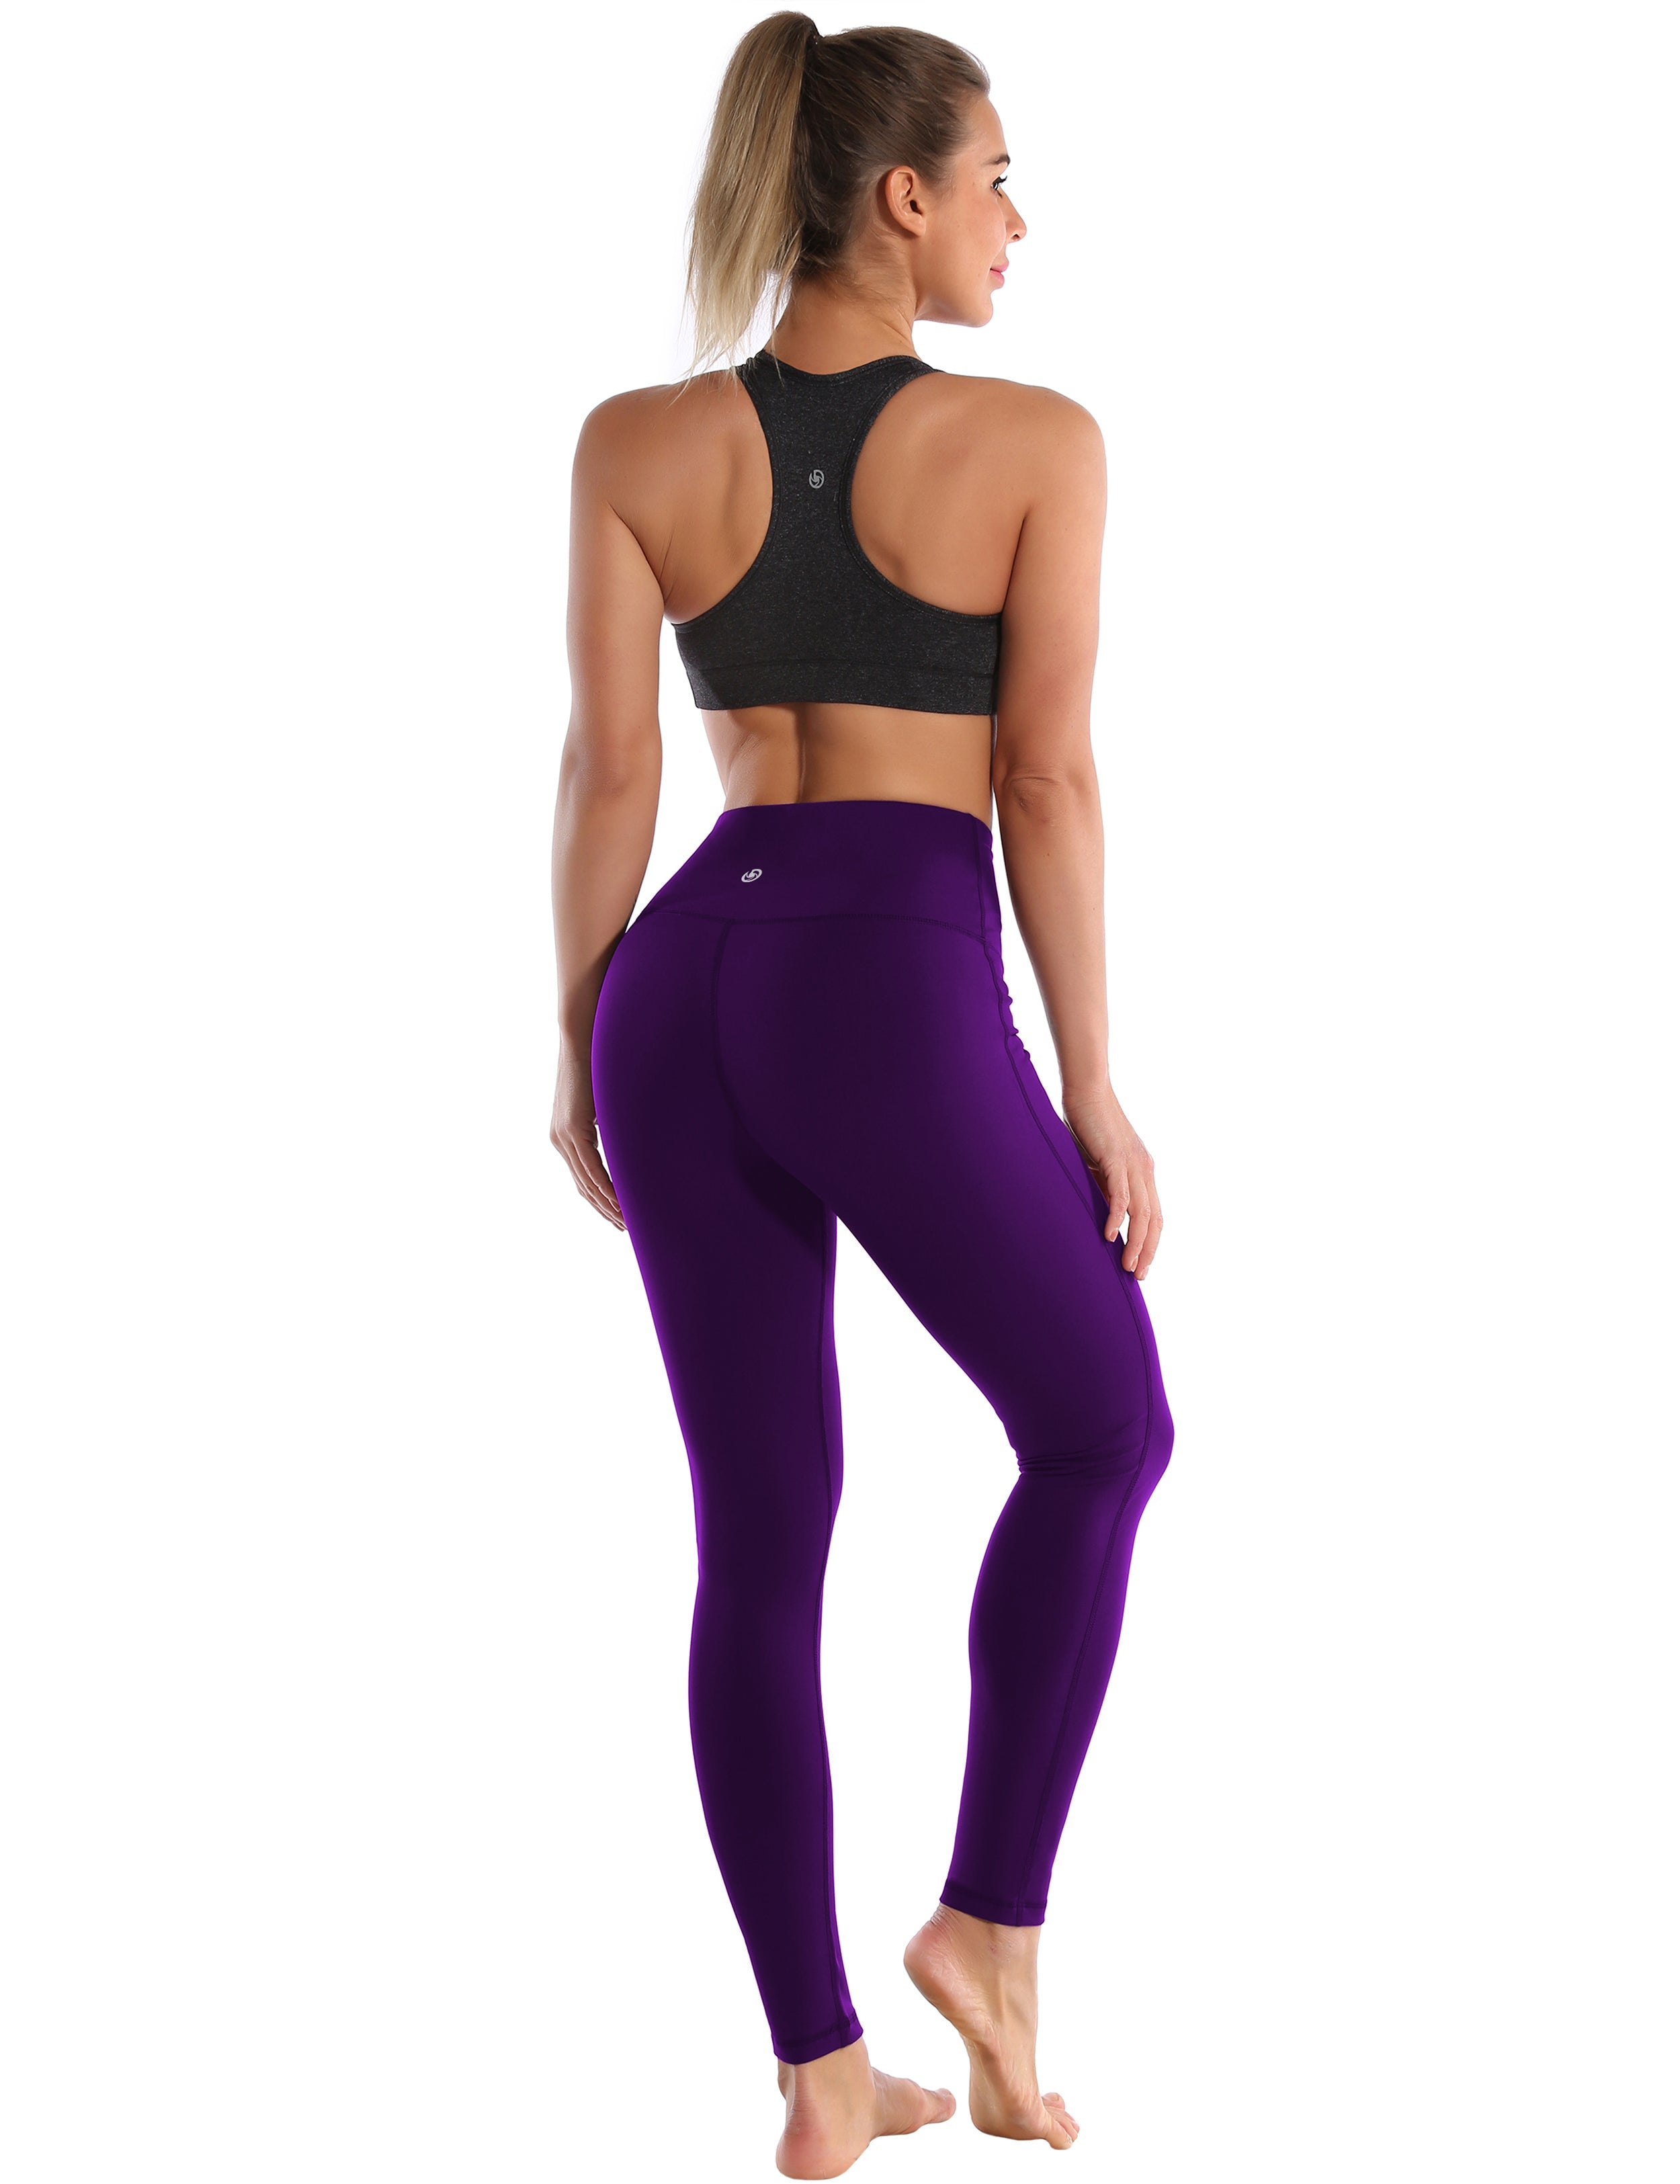 High Waist Side Line Yoga Pants eggplantpurple Side Line is Make Your Legs Look Longer and Thinner 75%Nylon/25%Spandex Fabric doesn't attract lint easily 4-way stretch No see-through Moisture-wicking Tummy control Inner pocket Two lengths